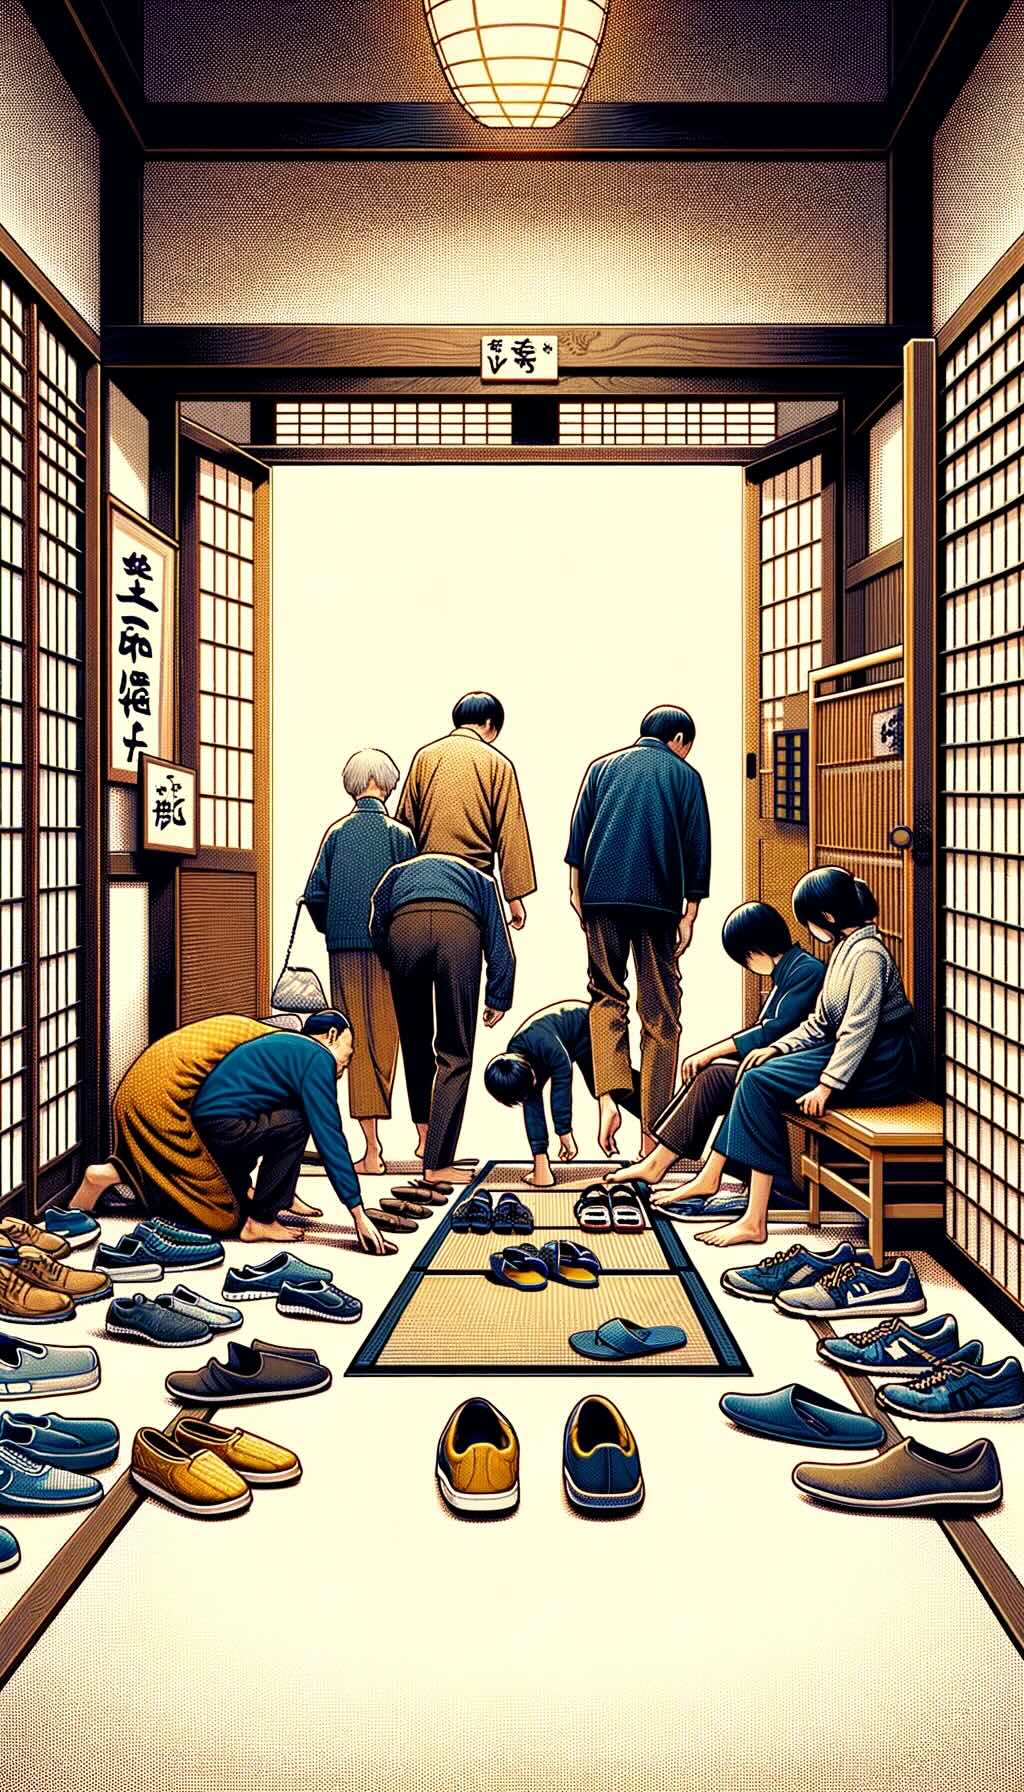 Japanese custom of removing shoes indoors, features a Japanese genkan (entryway) where people are taking off their shoes and switching to slippers, showcasing the cultural practice of maintaining cleanliness and respect for indoor spaces. It includes various types of shoes and slippers to represent the diversity of people adhering to this custom, conveying the significance of this tradition in Japanese homes and certain public establishments. The image reflects the deep-rooted cultural values of cleanliness, respect, and consideration for others.